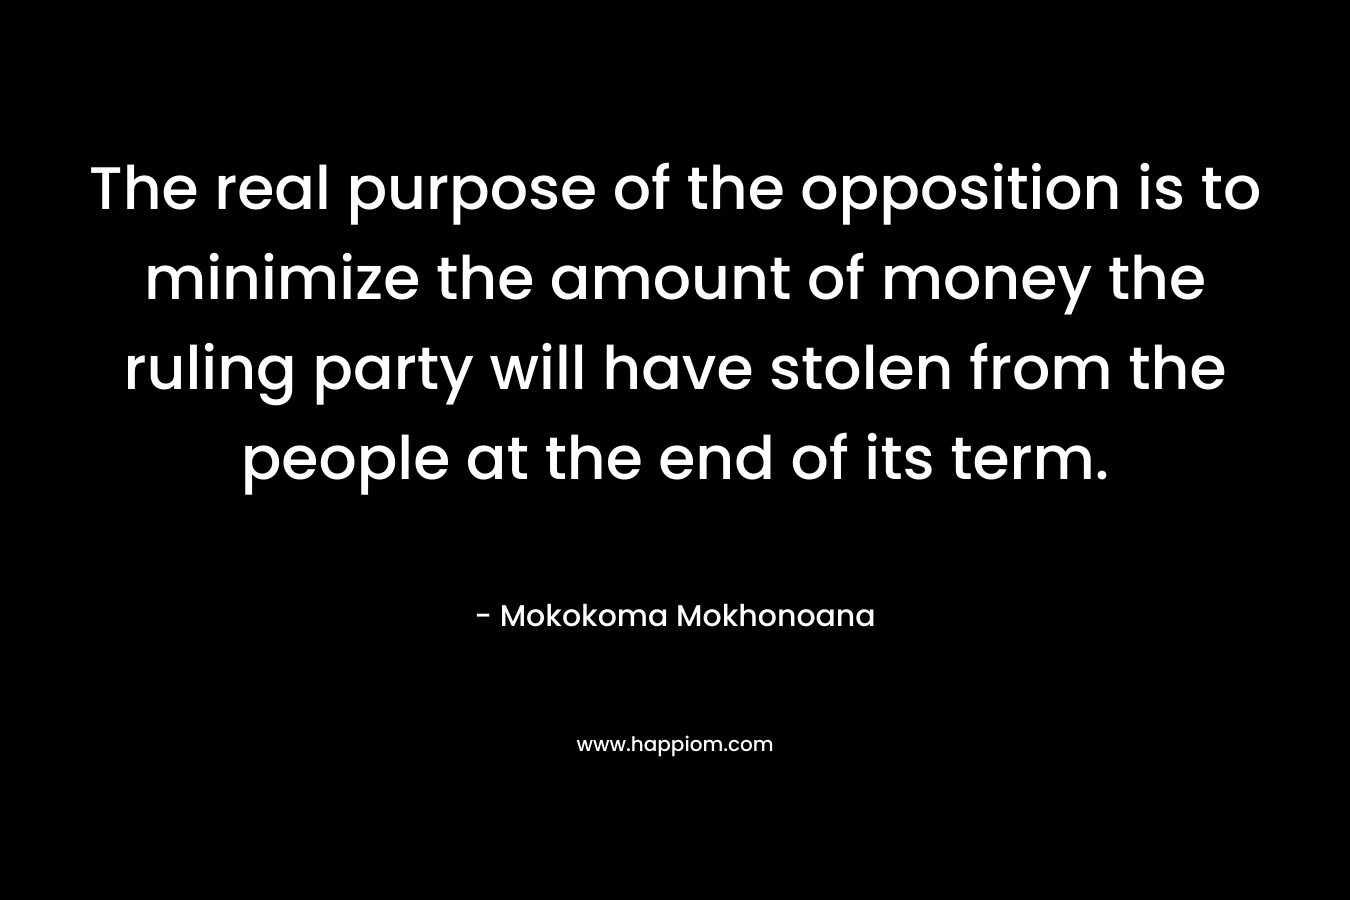 The real purpose of the opposition is to minimize the amount of money the ruling party will have stolen from the people at the end of its term.